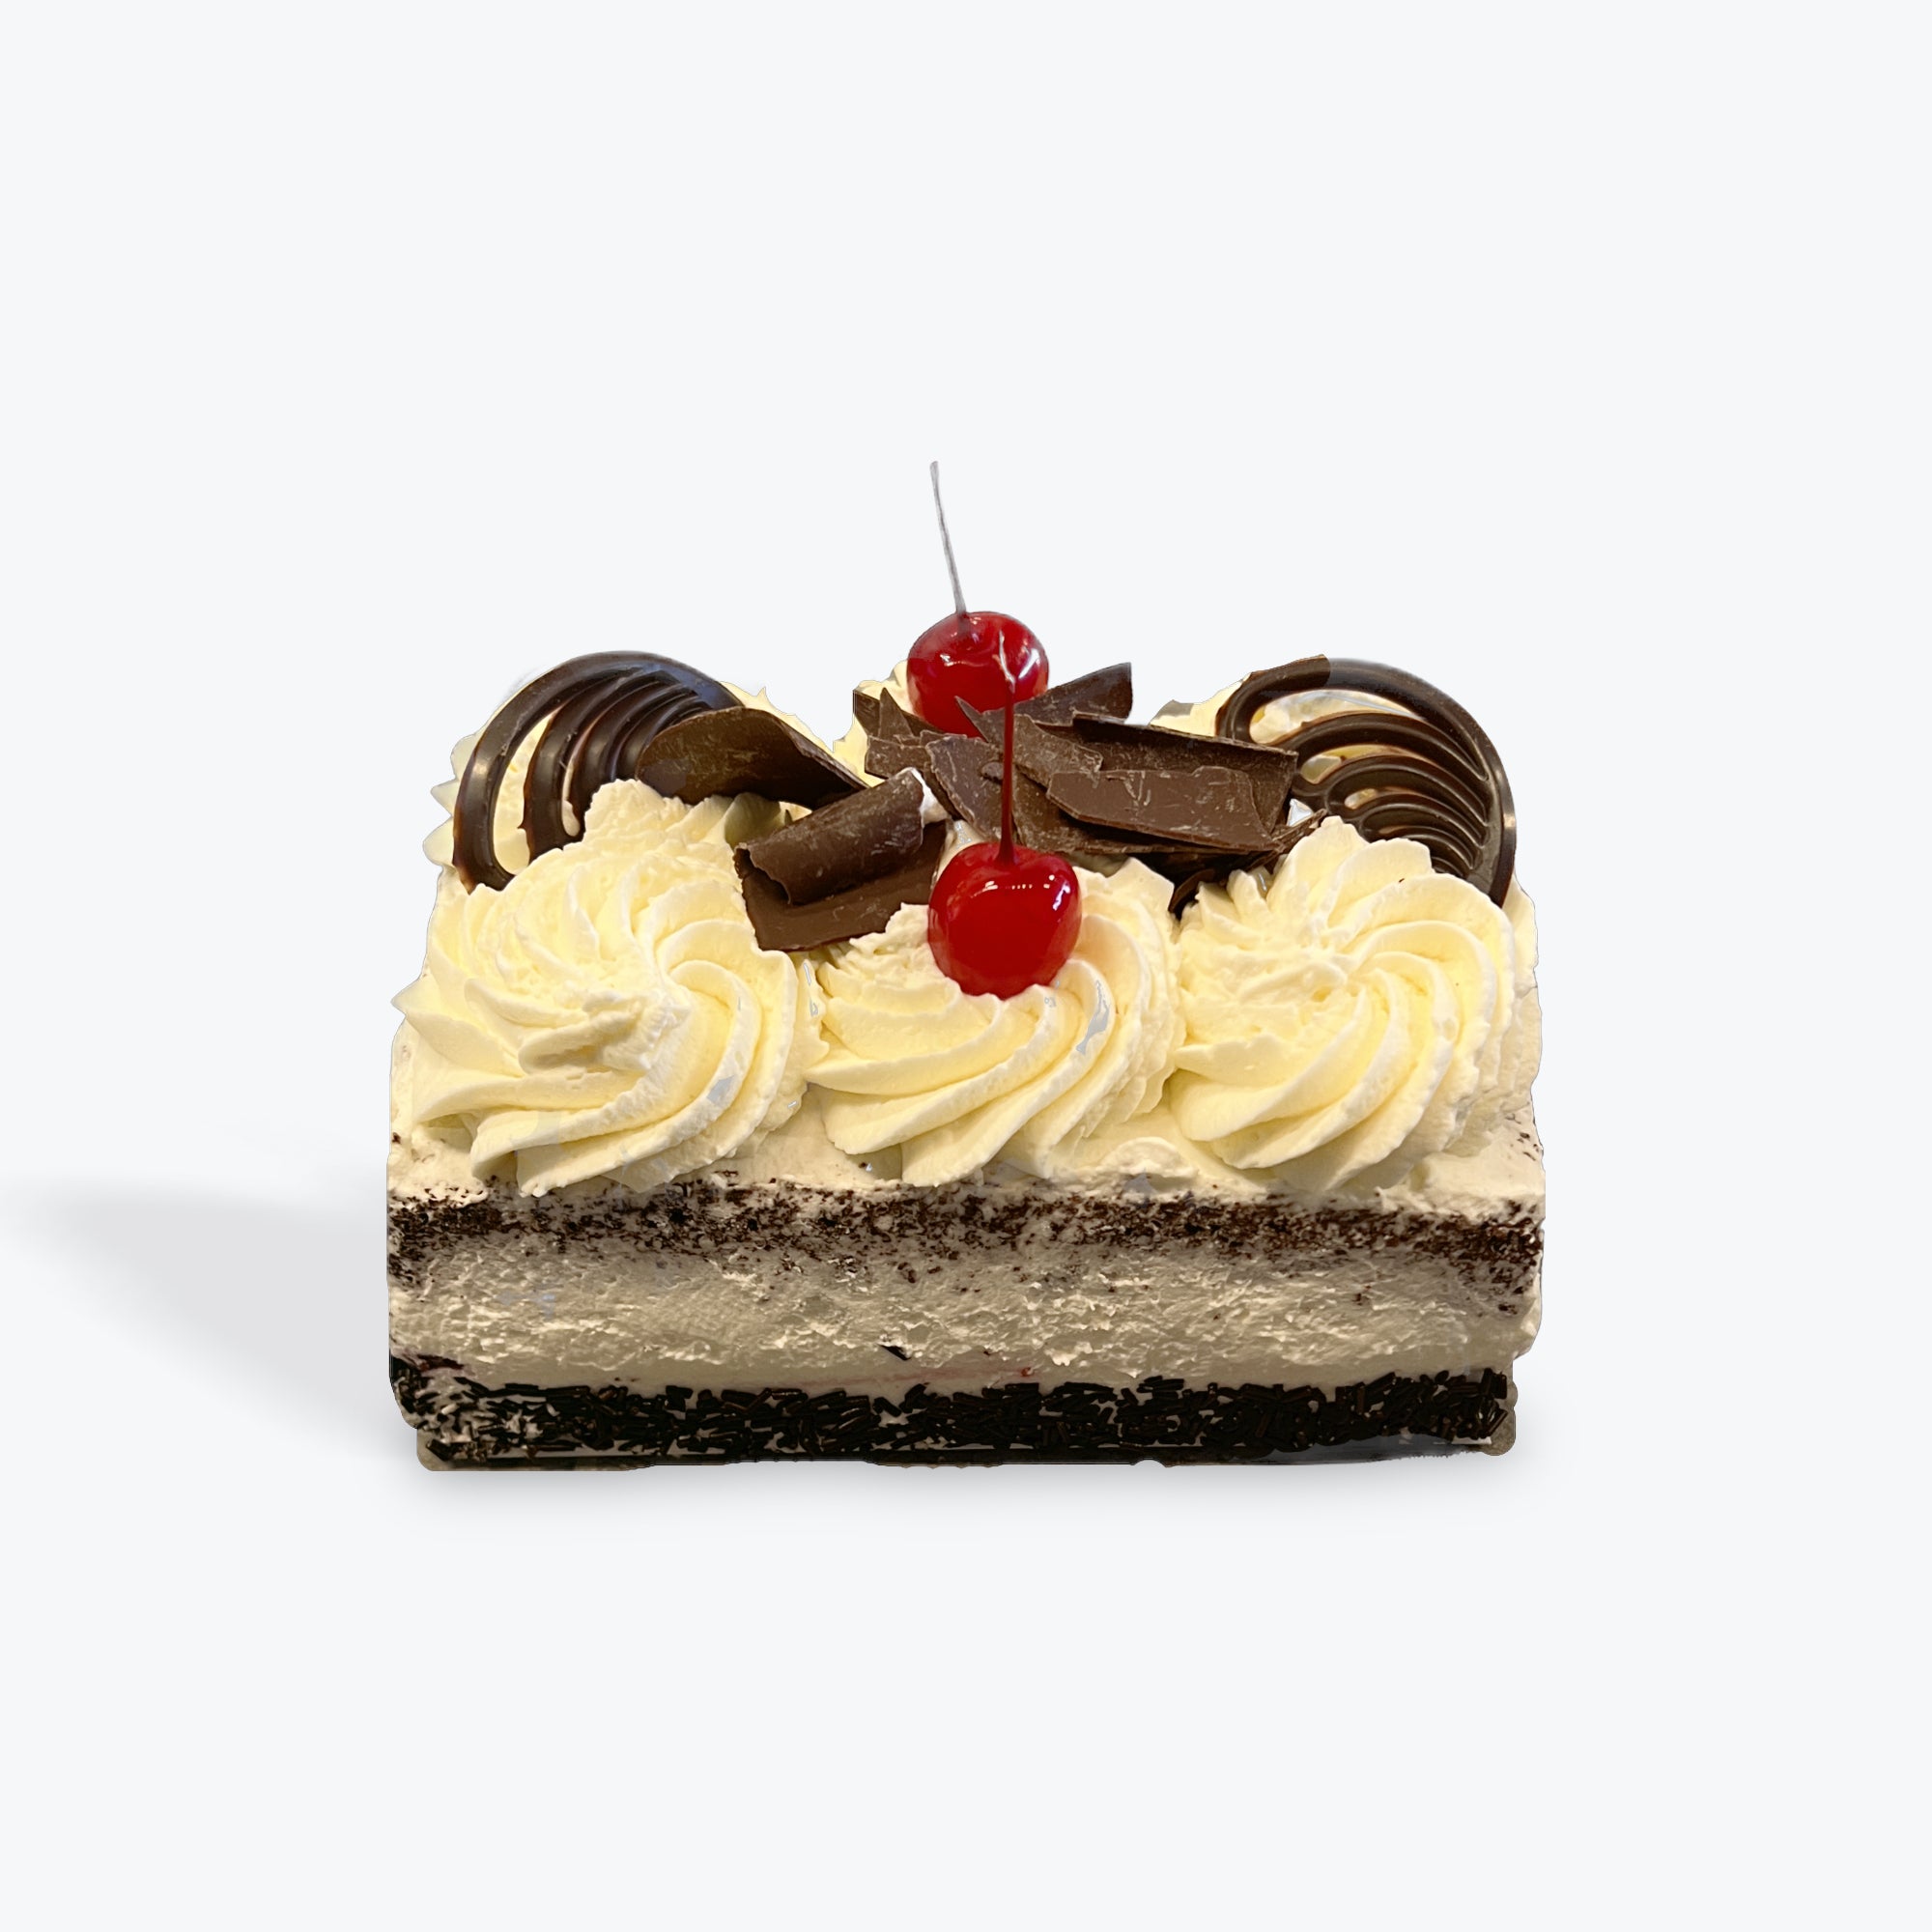 Indyeah - National Black Forest Cake Day is an annual feast celebrated on  March 28th. A soft, chocolate flavored, multi-layered, cherry filled Black  Forest cake is lovee! #IndYeah #BlackForestCake #Cakes #Desserts #CakeDay |